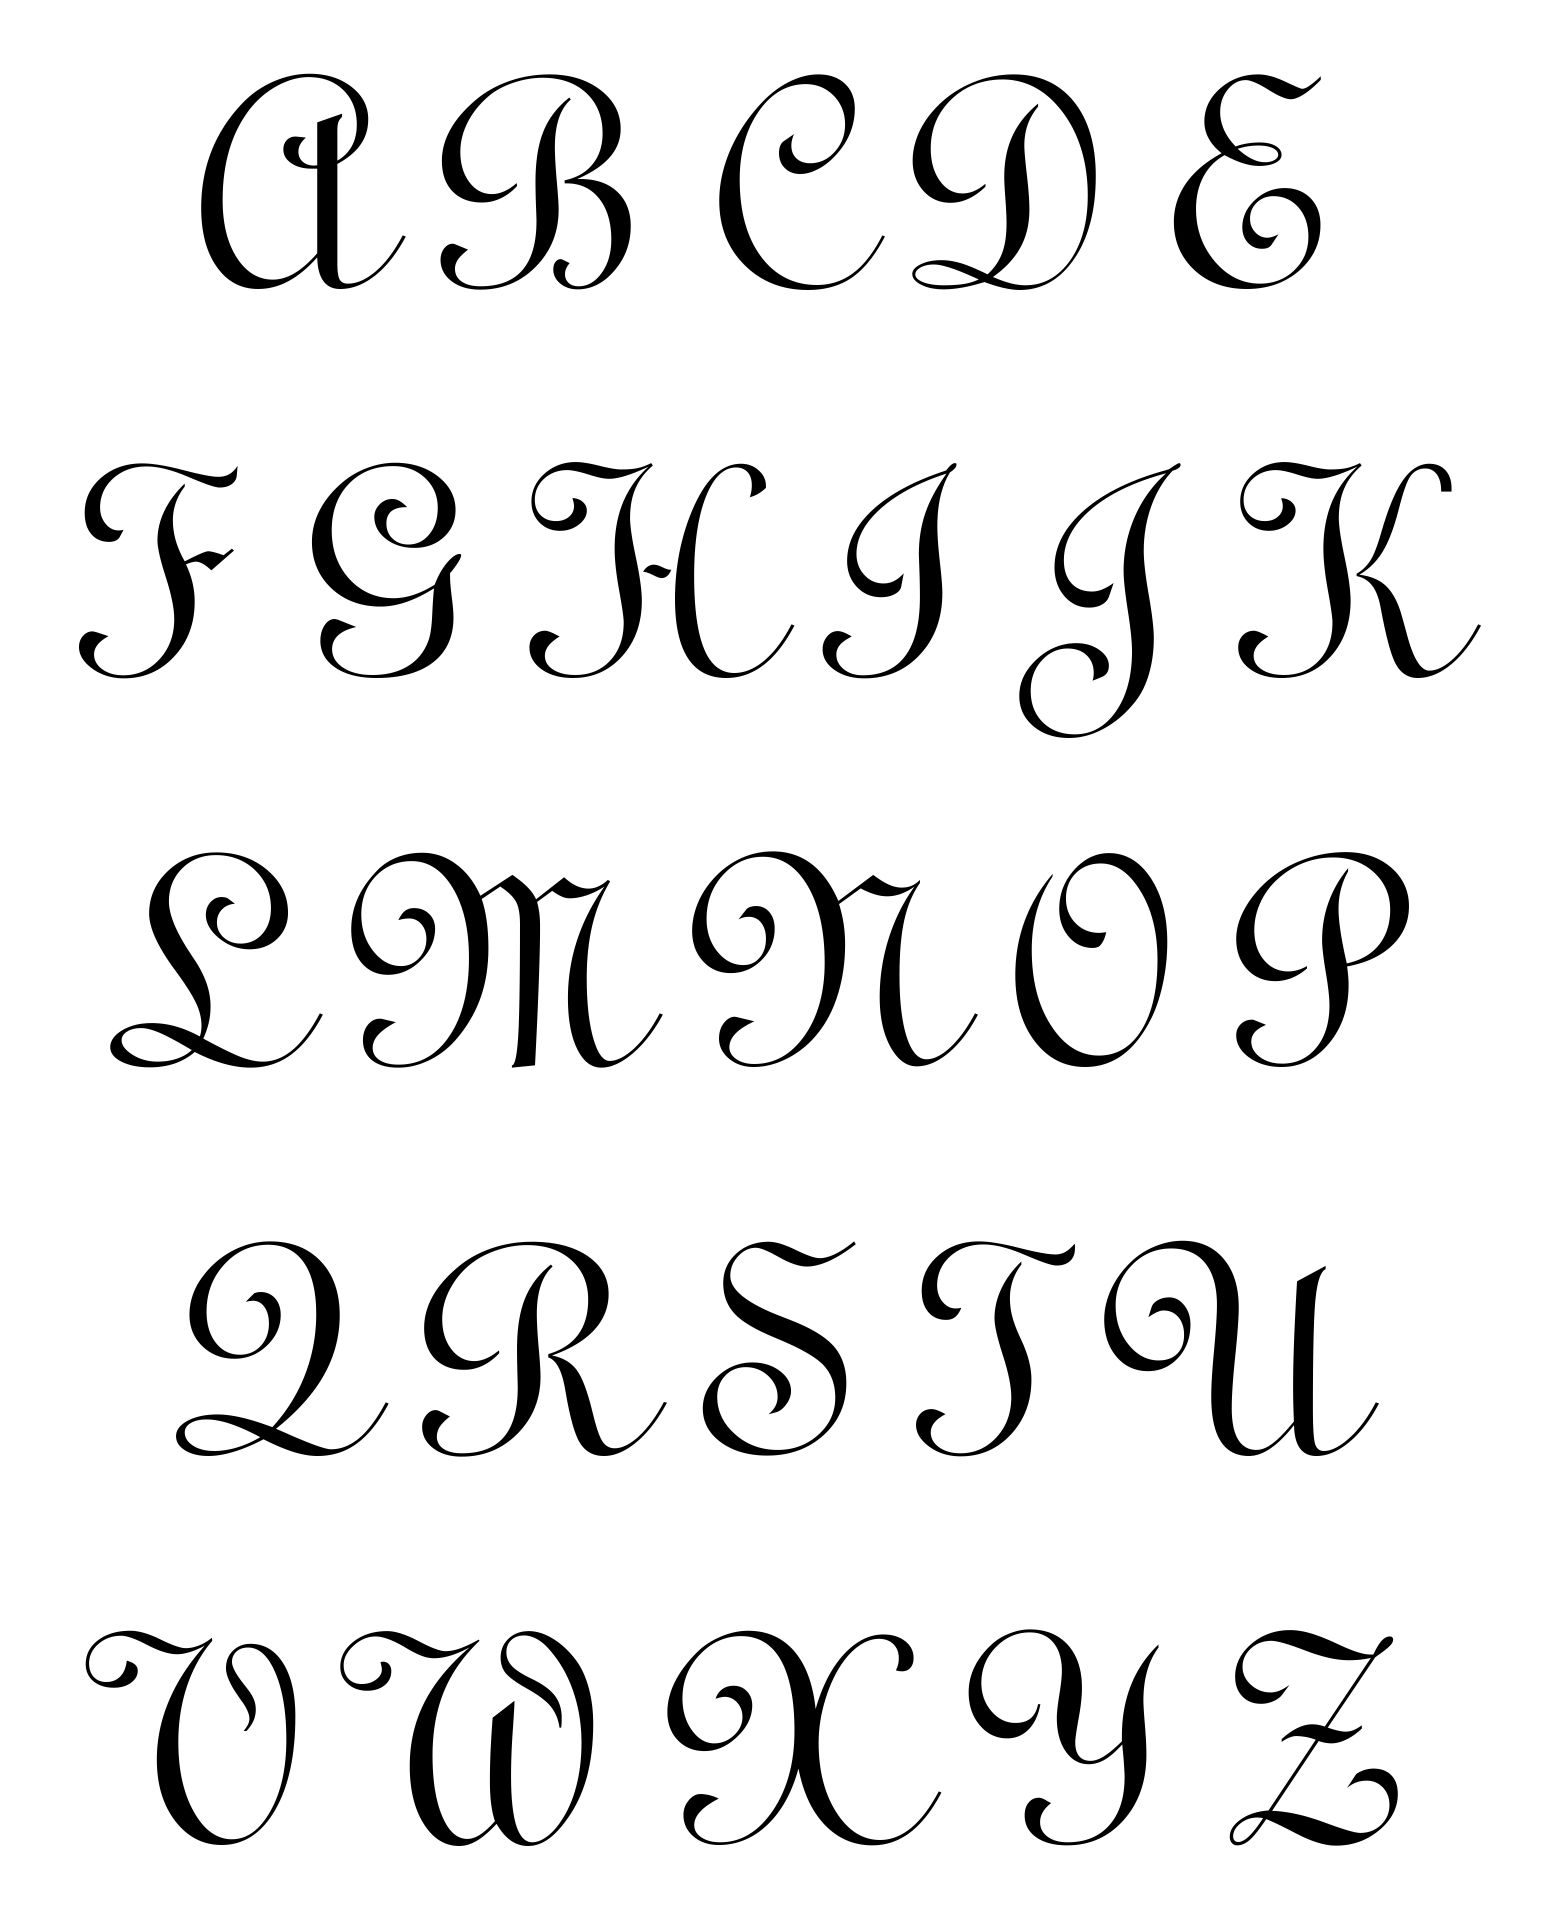 Writing Styles Of Alphabets